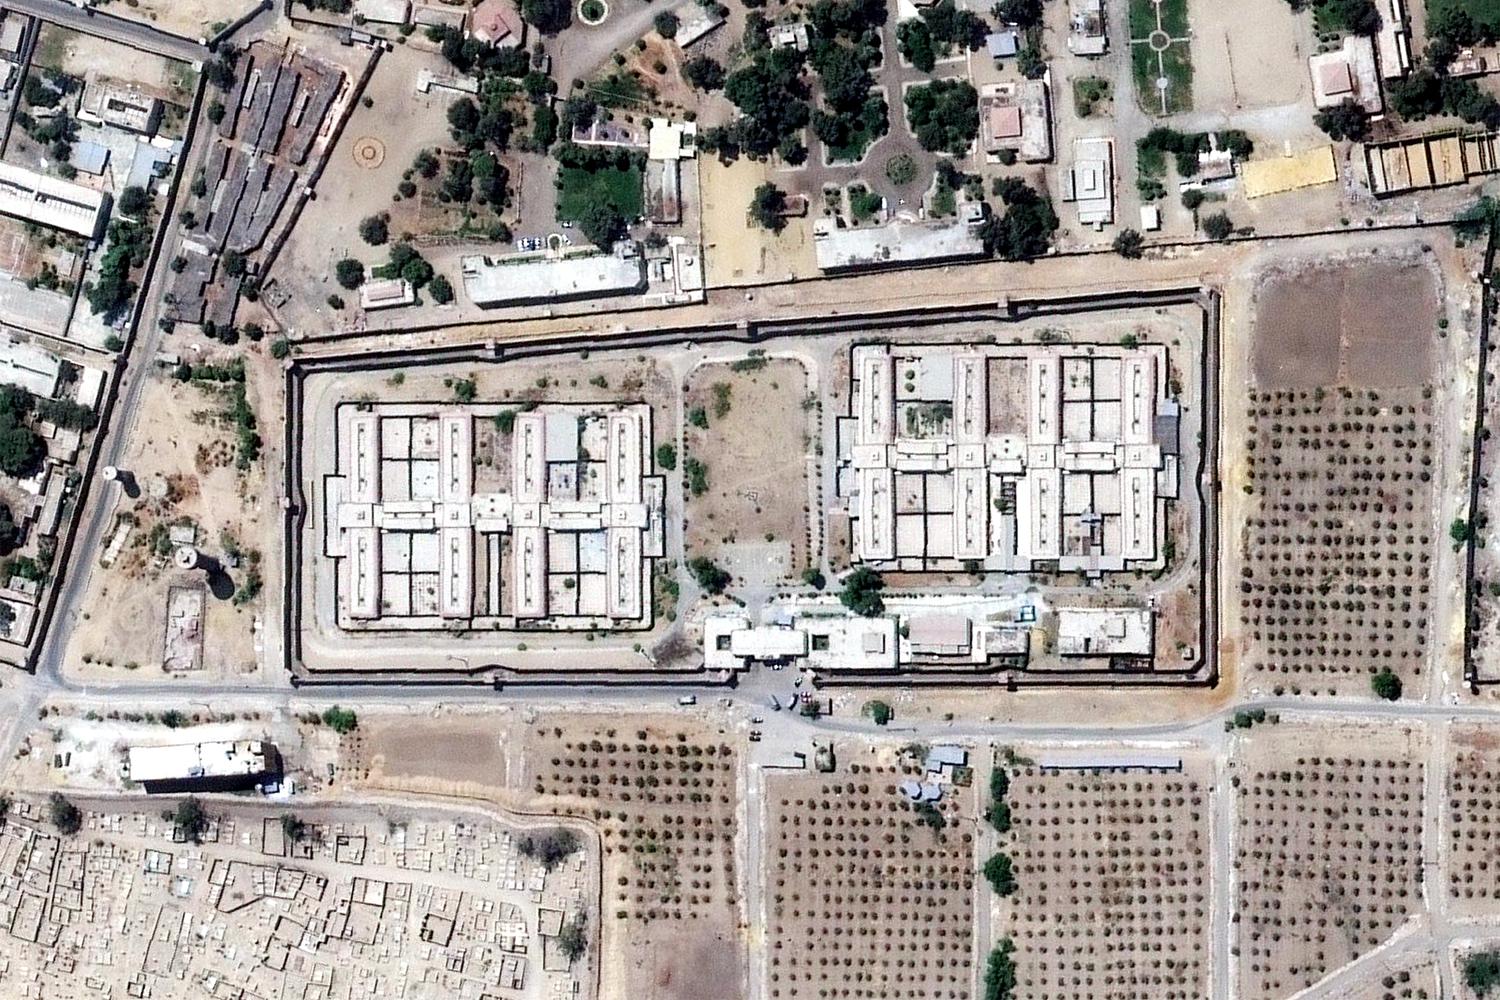 A satellite photograph of Scorpion Prison taken in September 2016. Inmates suffer abuses in secret and are denied most access to the outside world. Satellite imagery